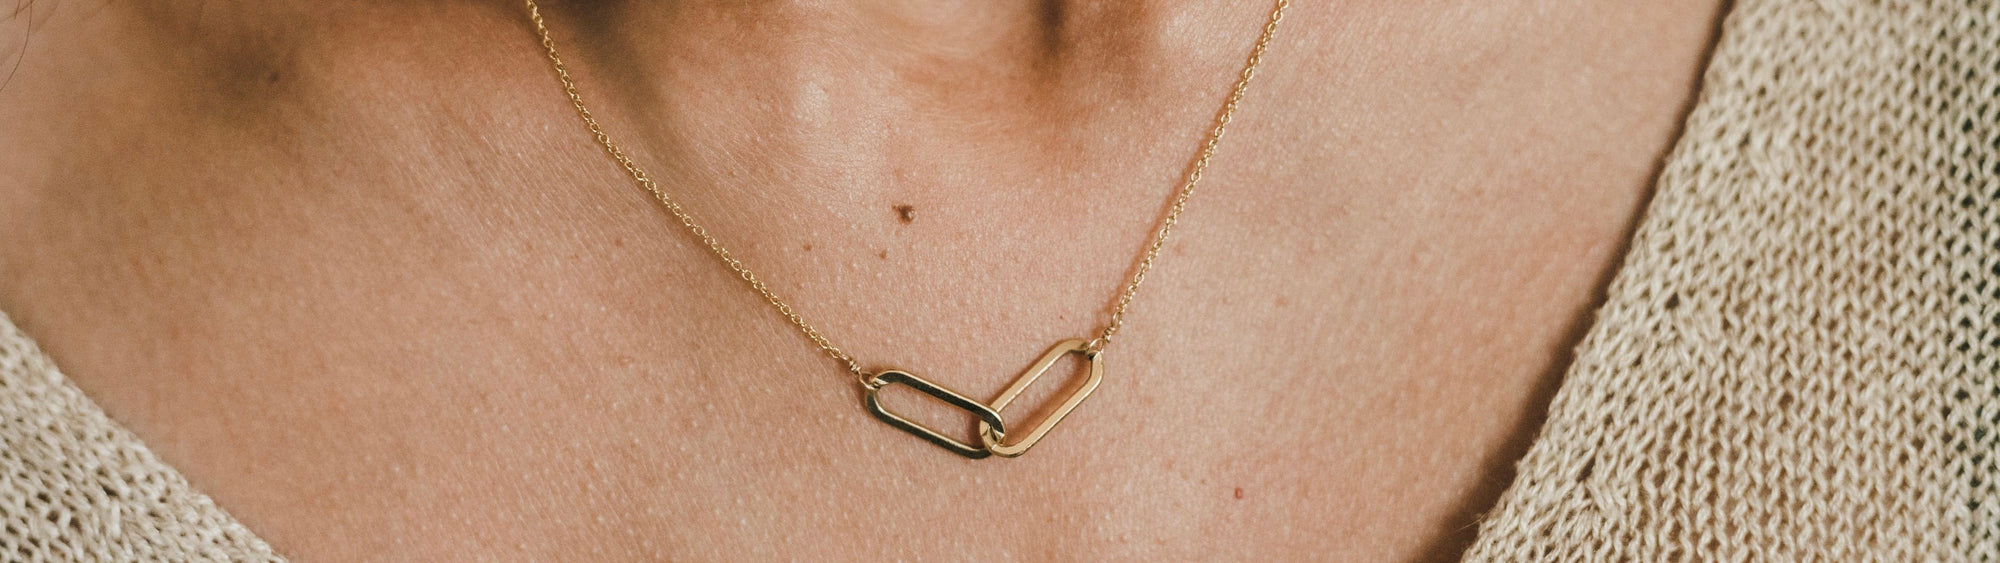 Gold musical note pendant on a necklace against a person's neckline.